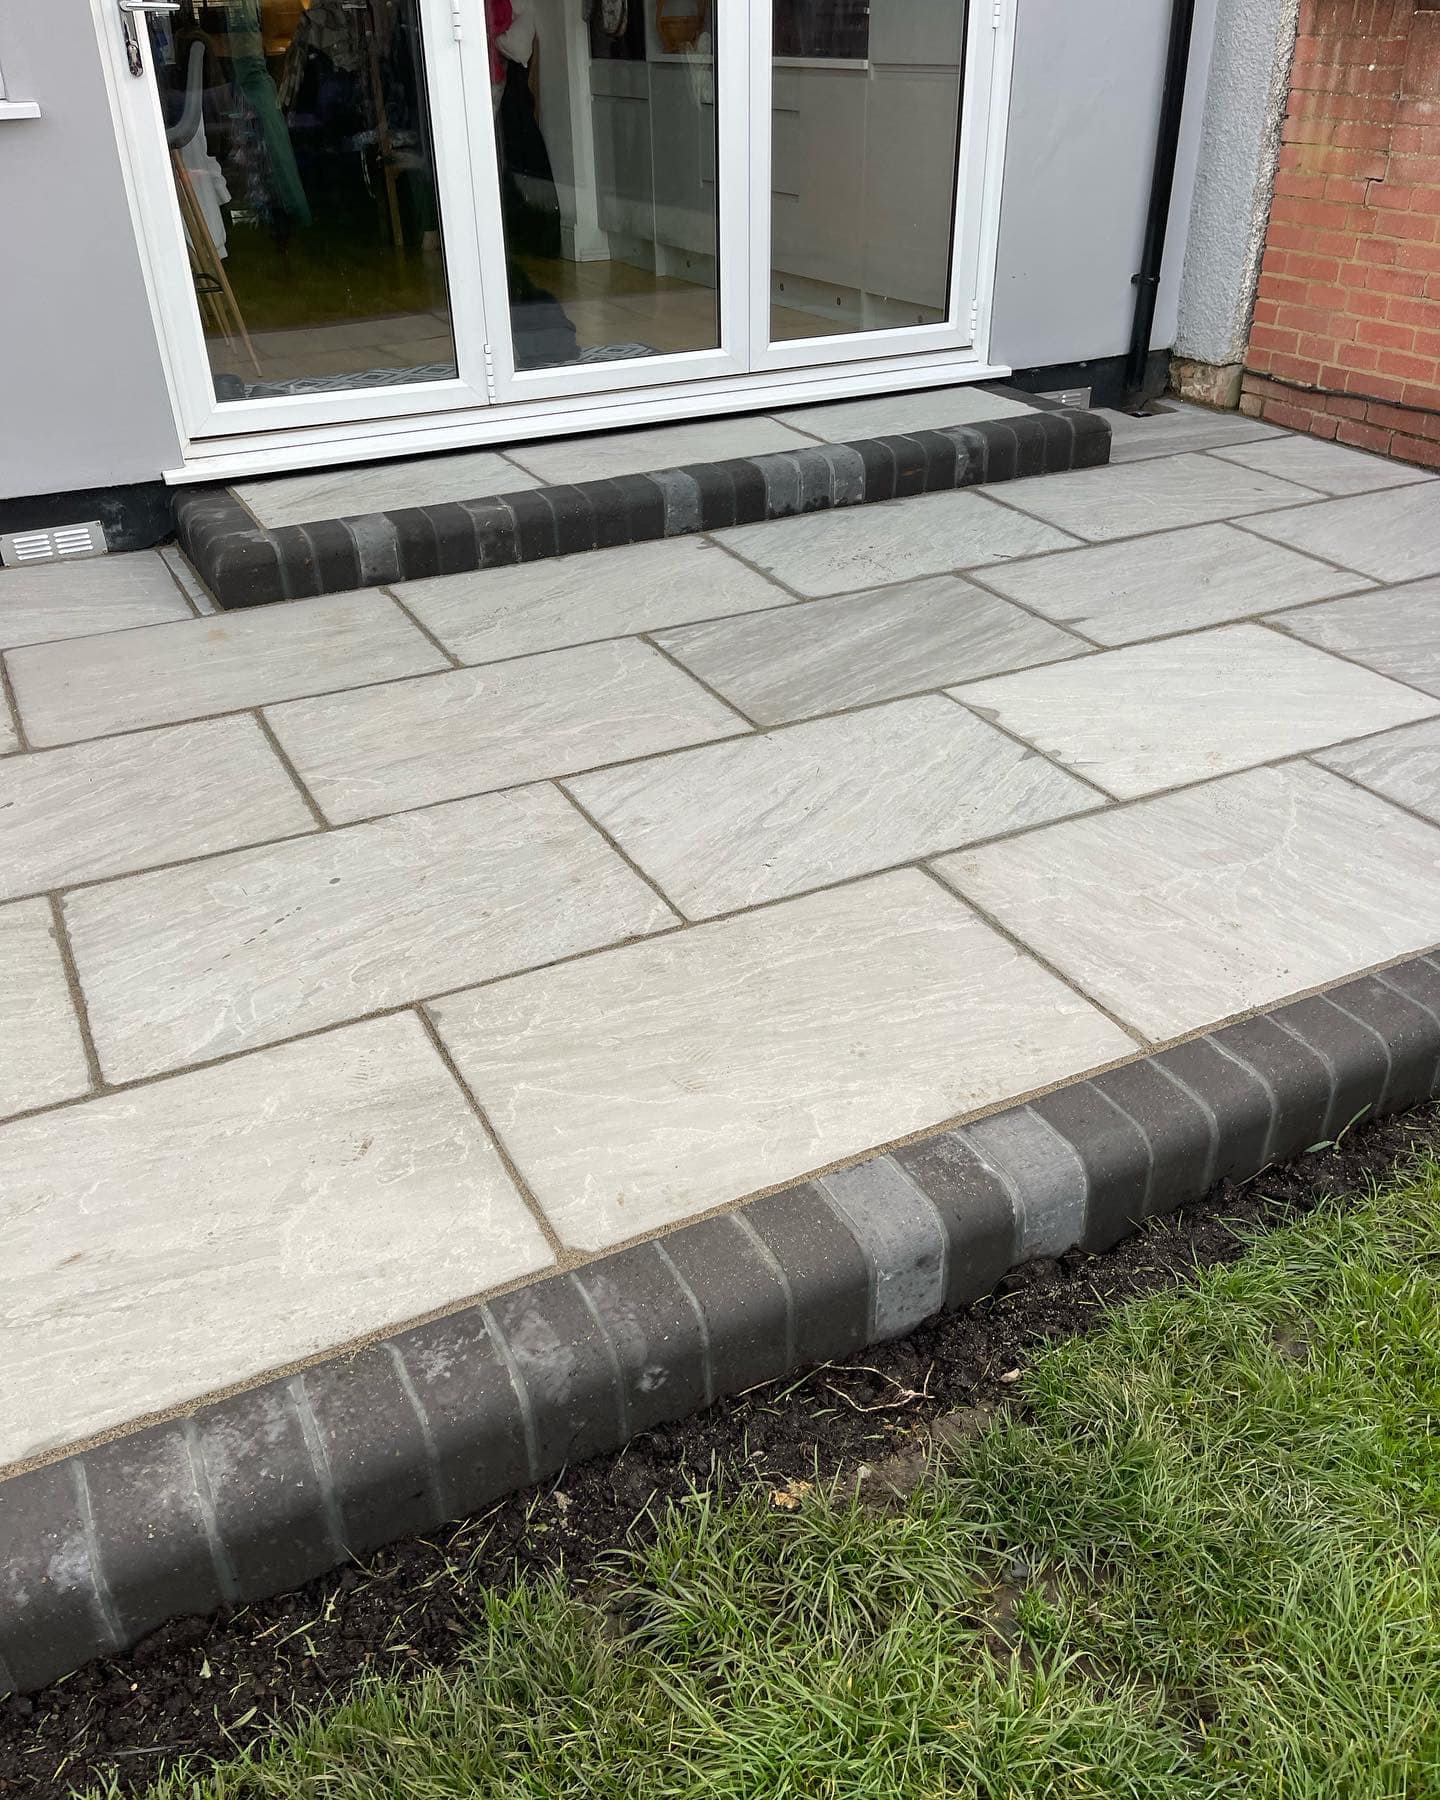 How to Easily Get Rid of Weeds in Block Paving?